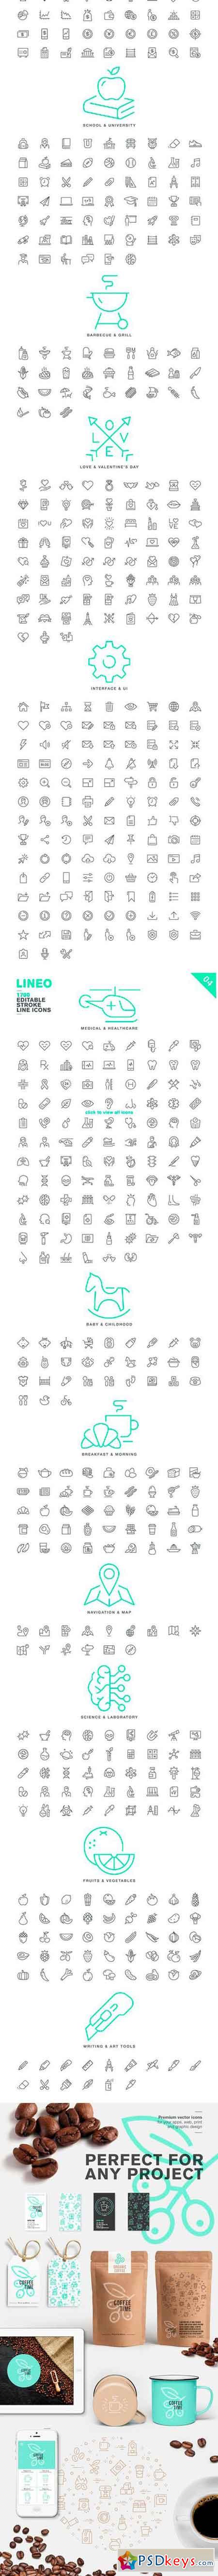 LINEO - 1700+ fully editable icons 2517764